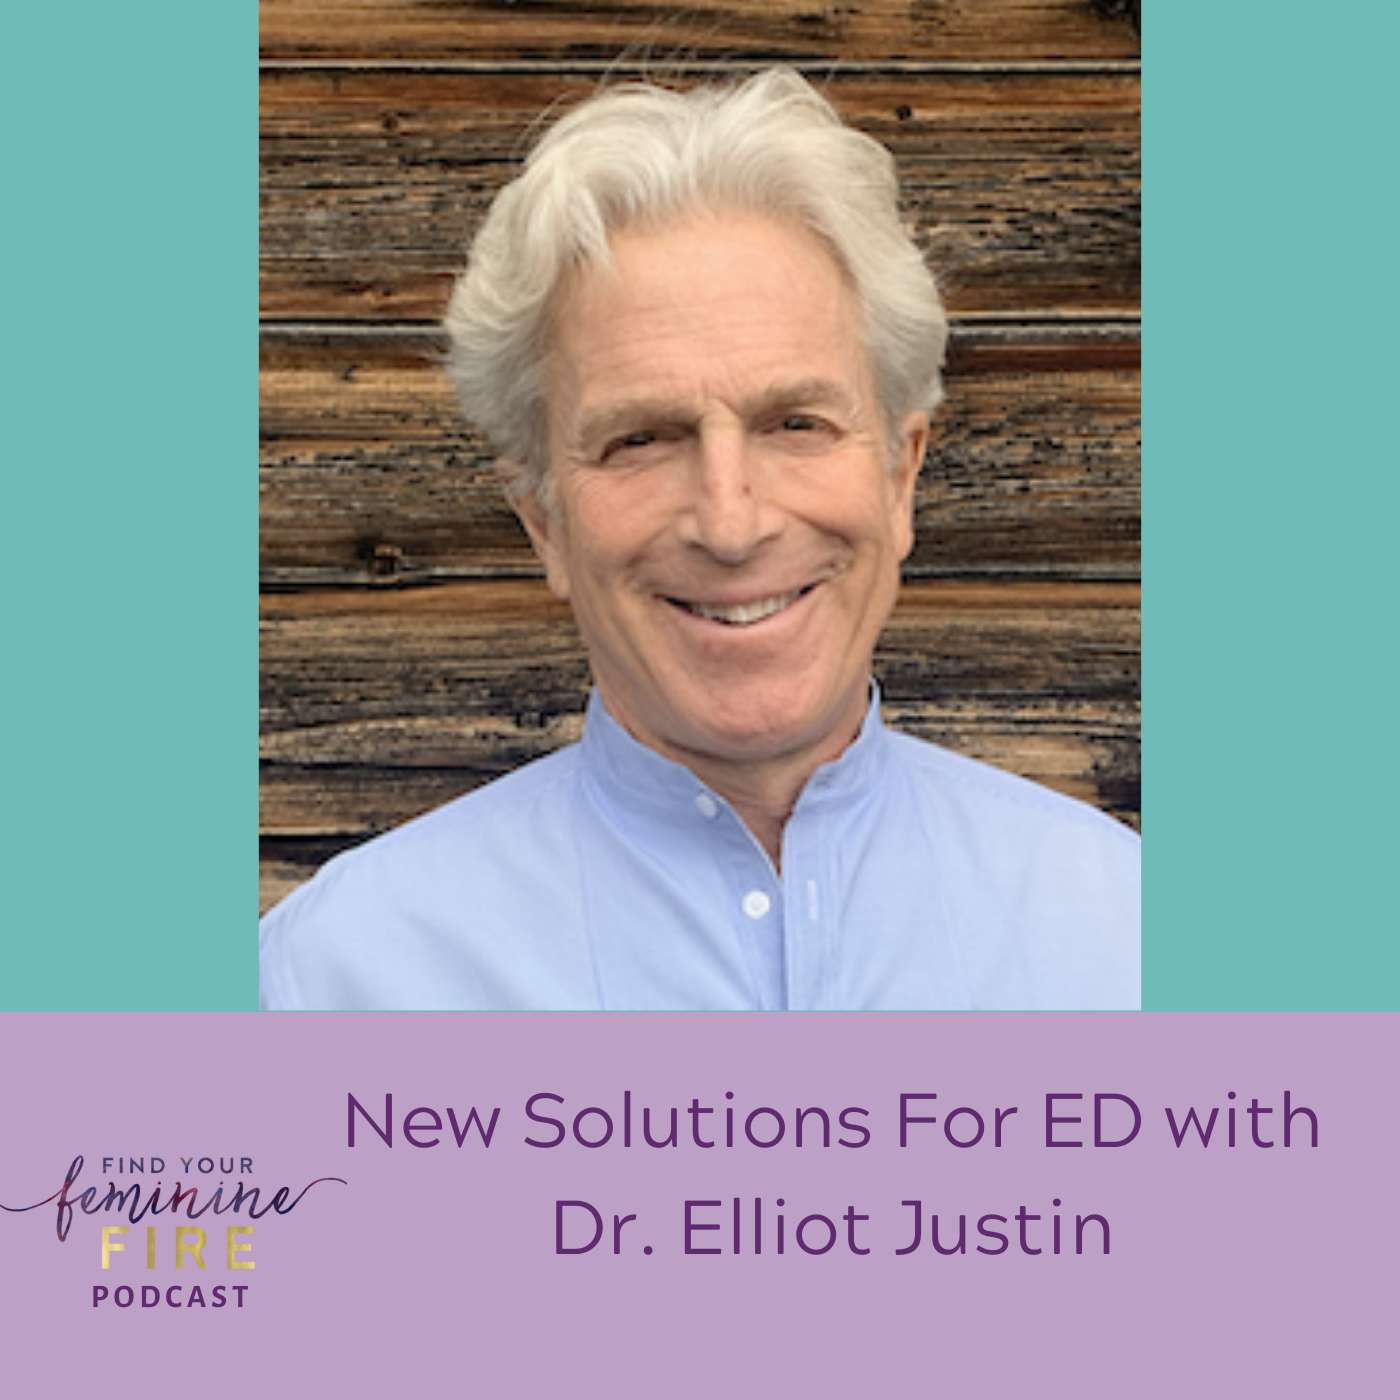 New Solutions For ED With Dr. Elliot Justin